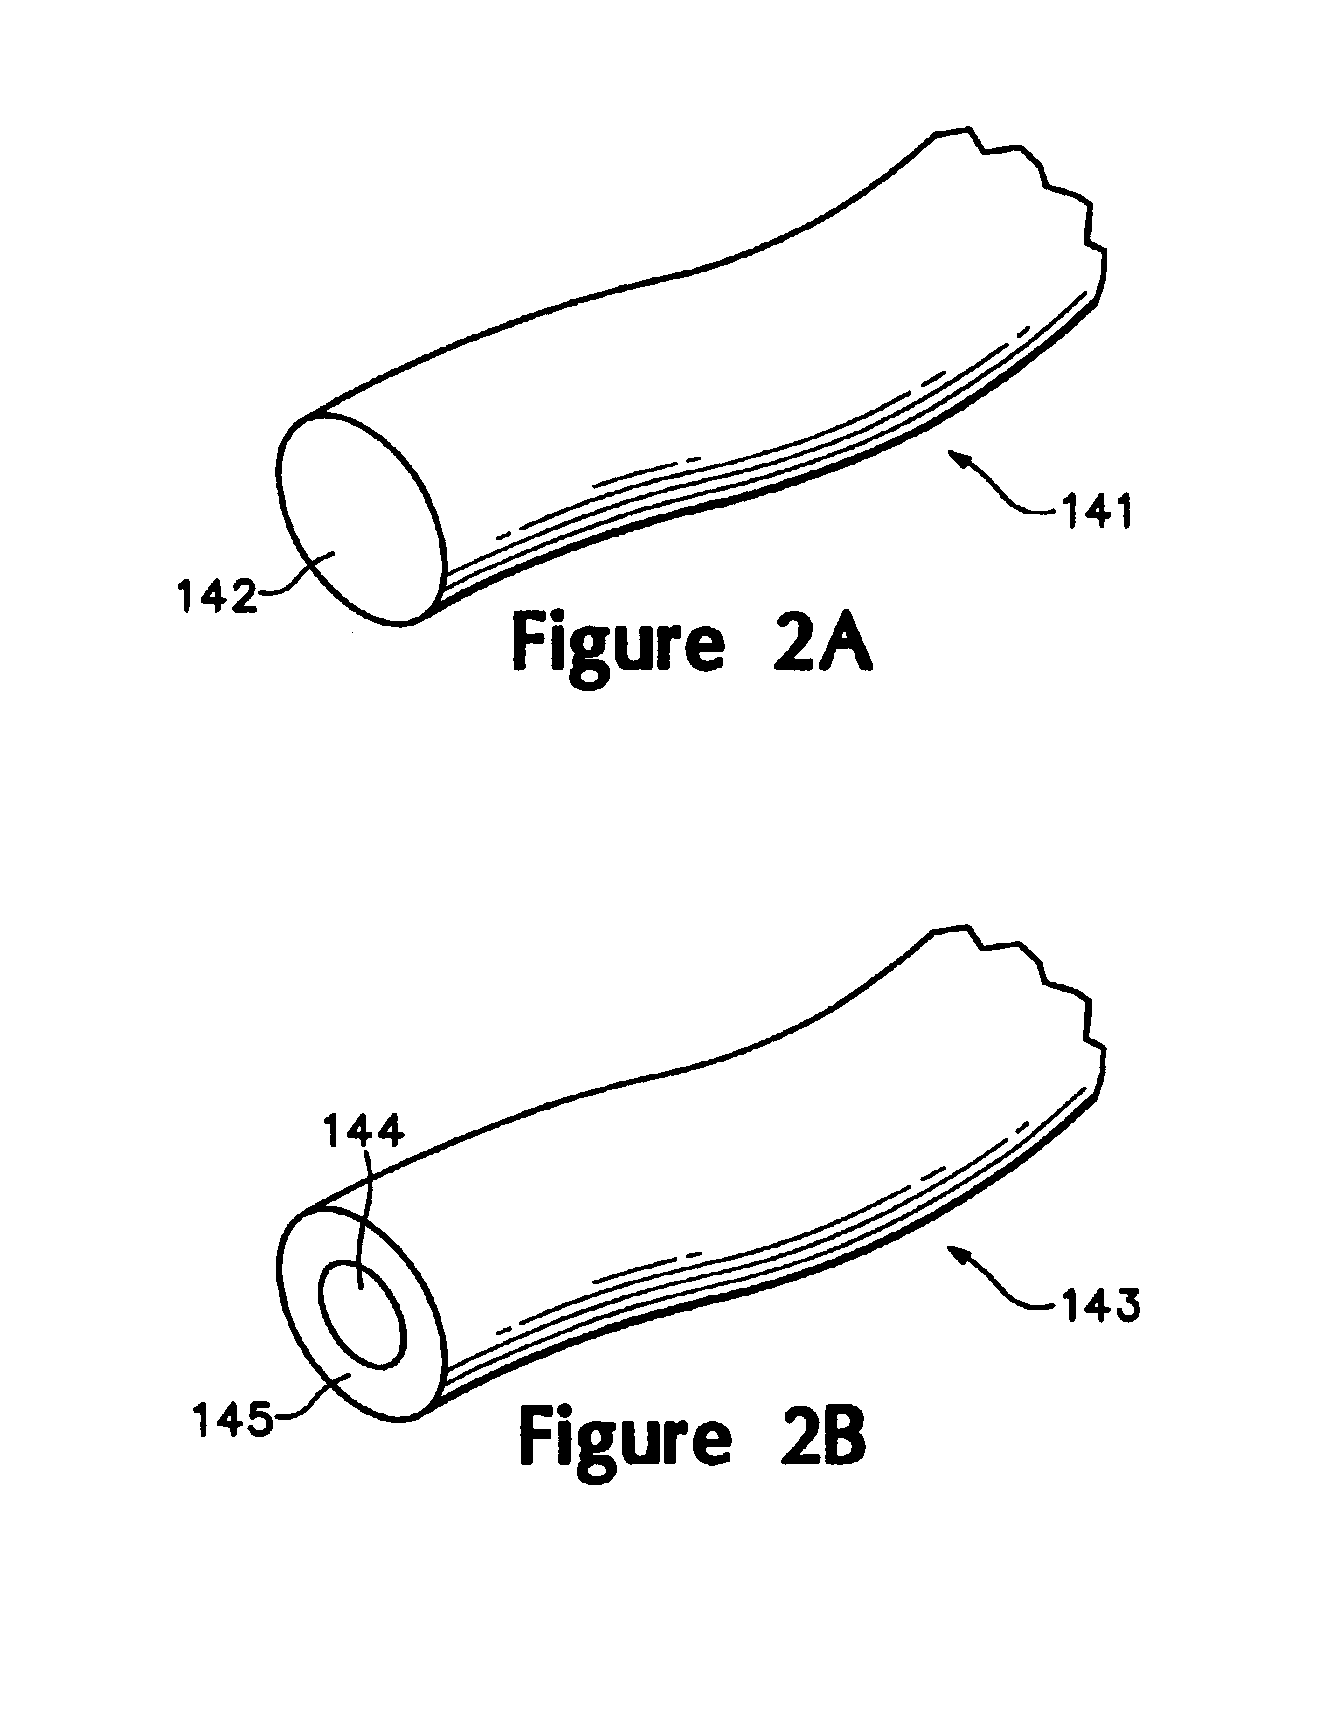 Footwear incorporating a textile with fusible filaments and fibers